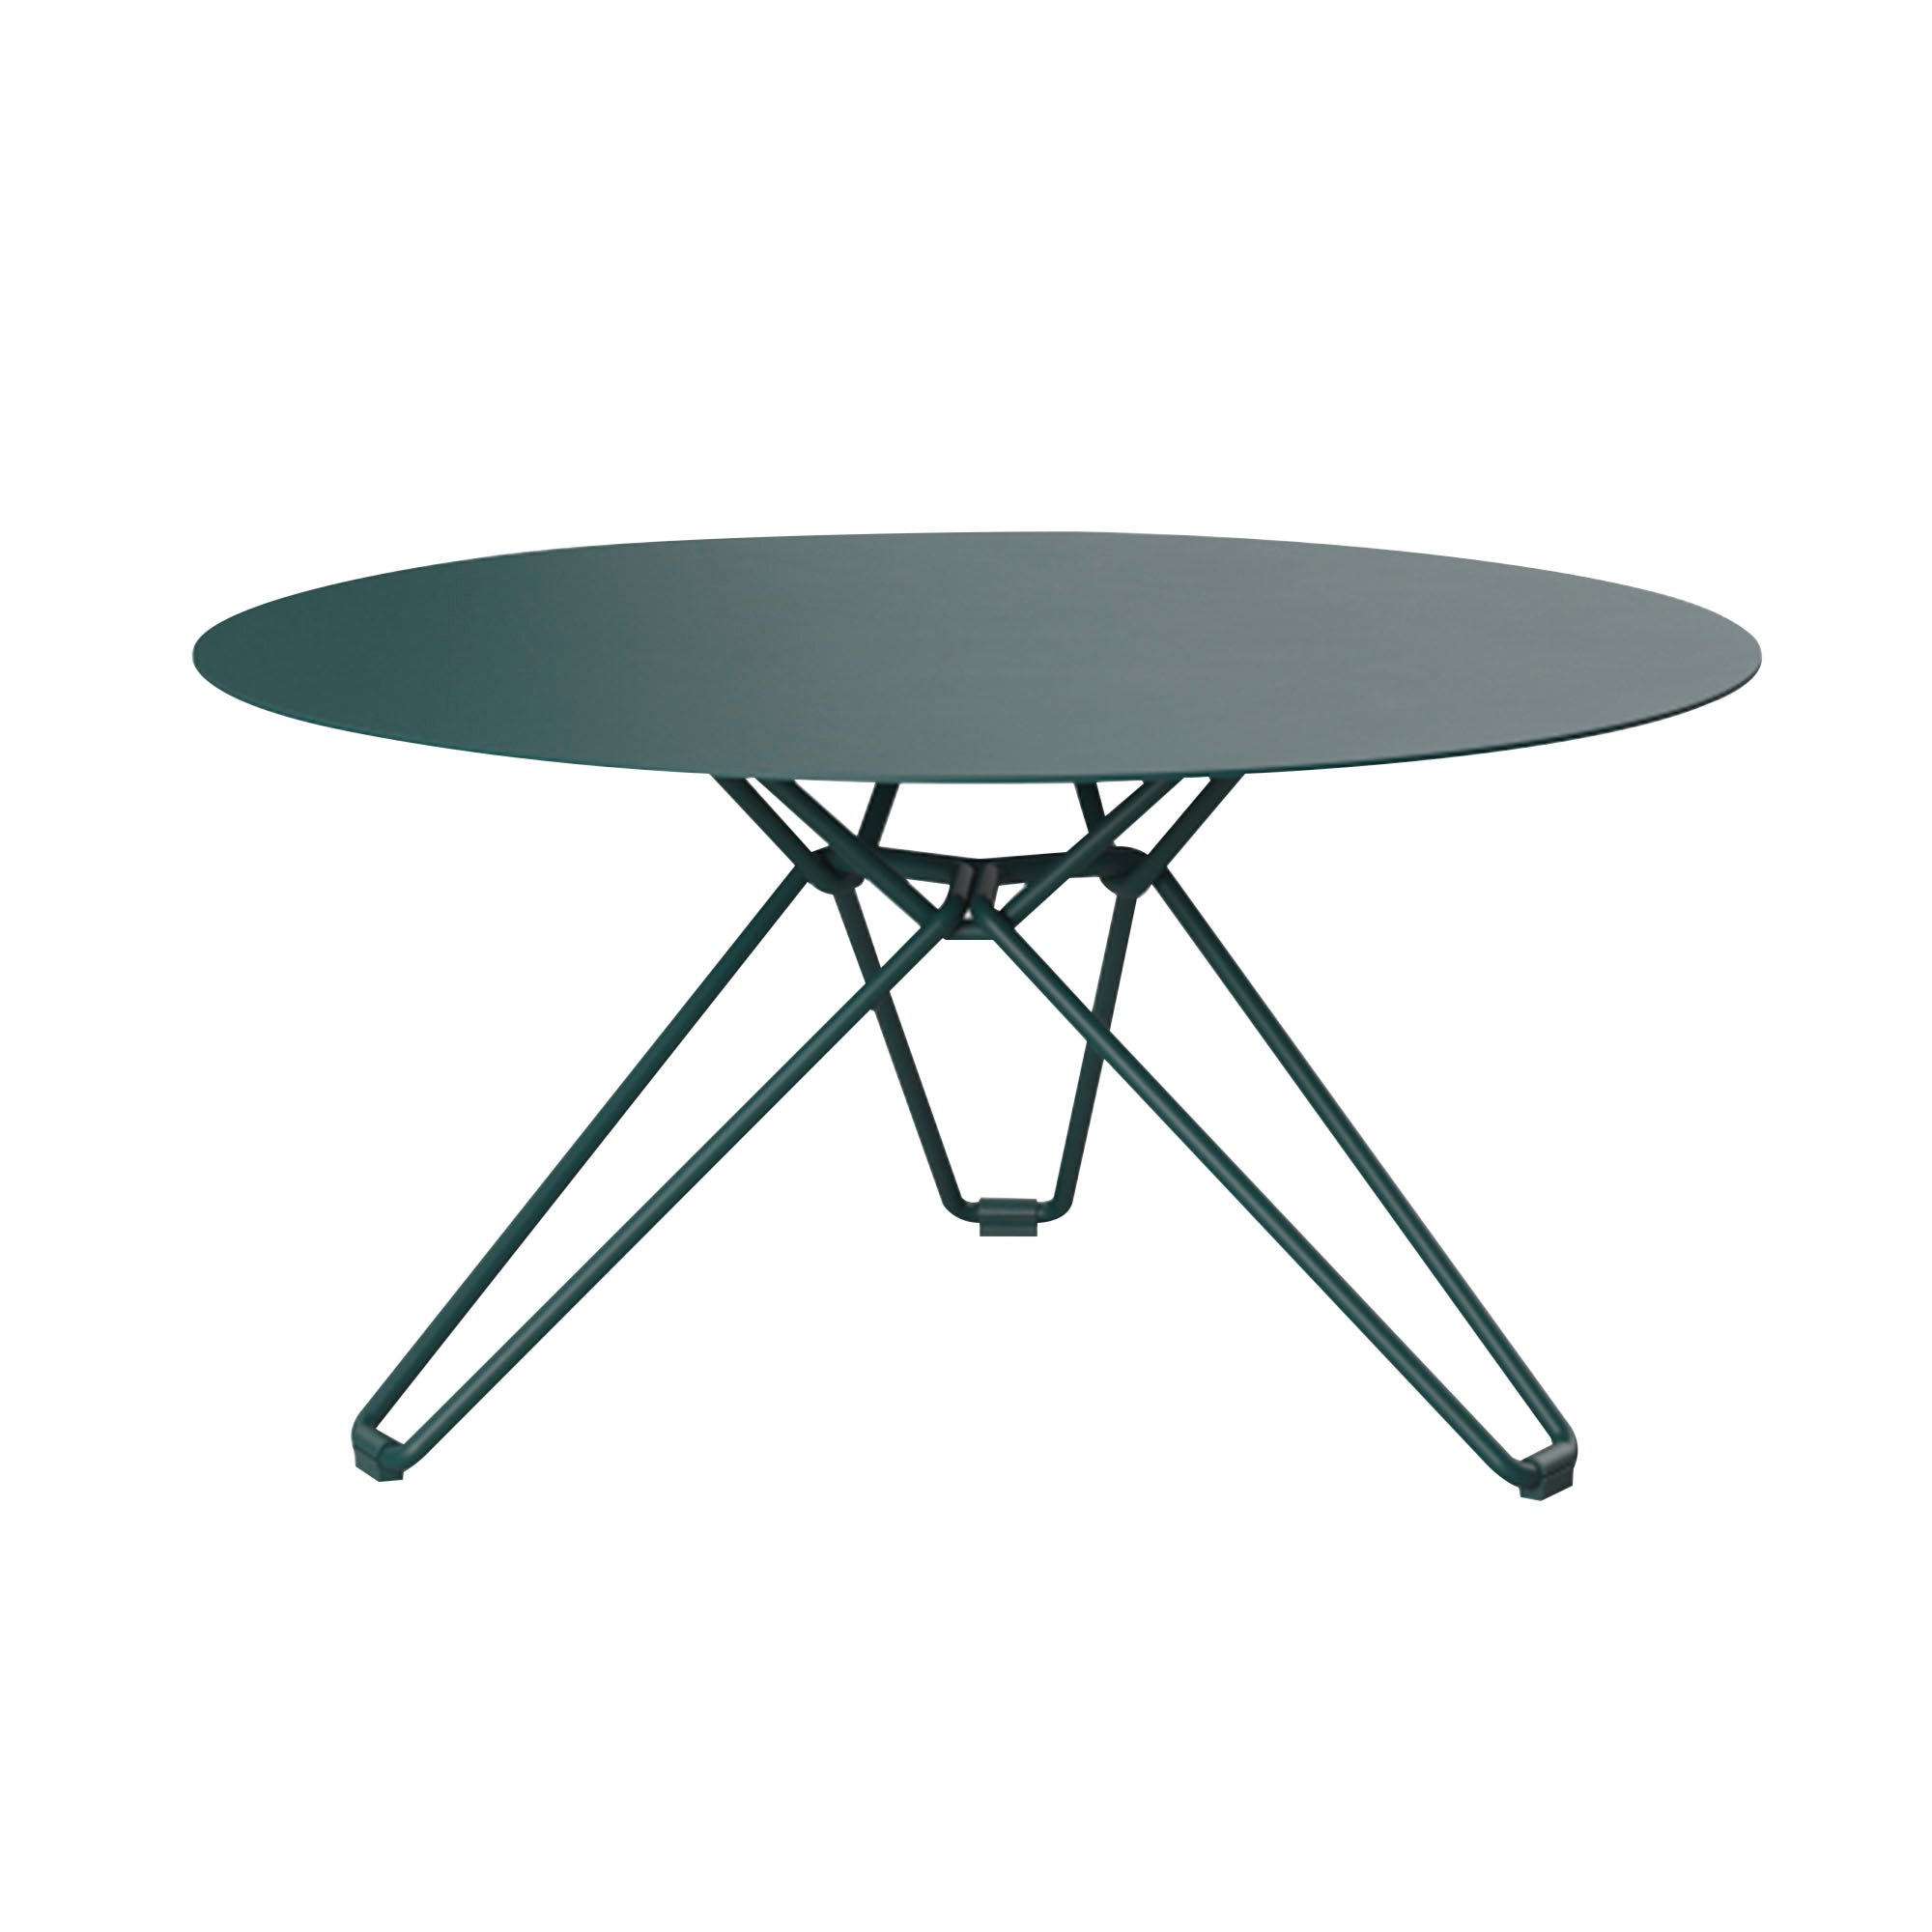 Tio Coffee Table: Round + Large - 39.4